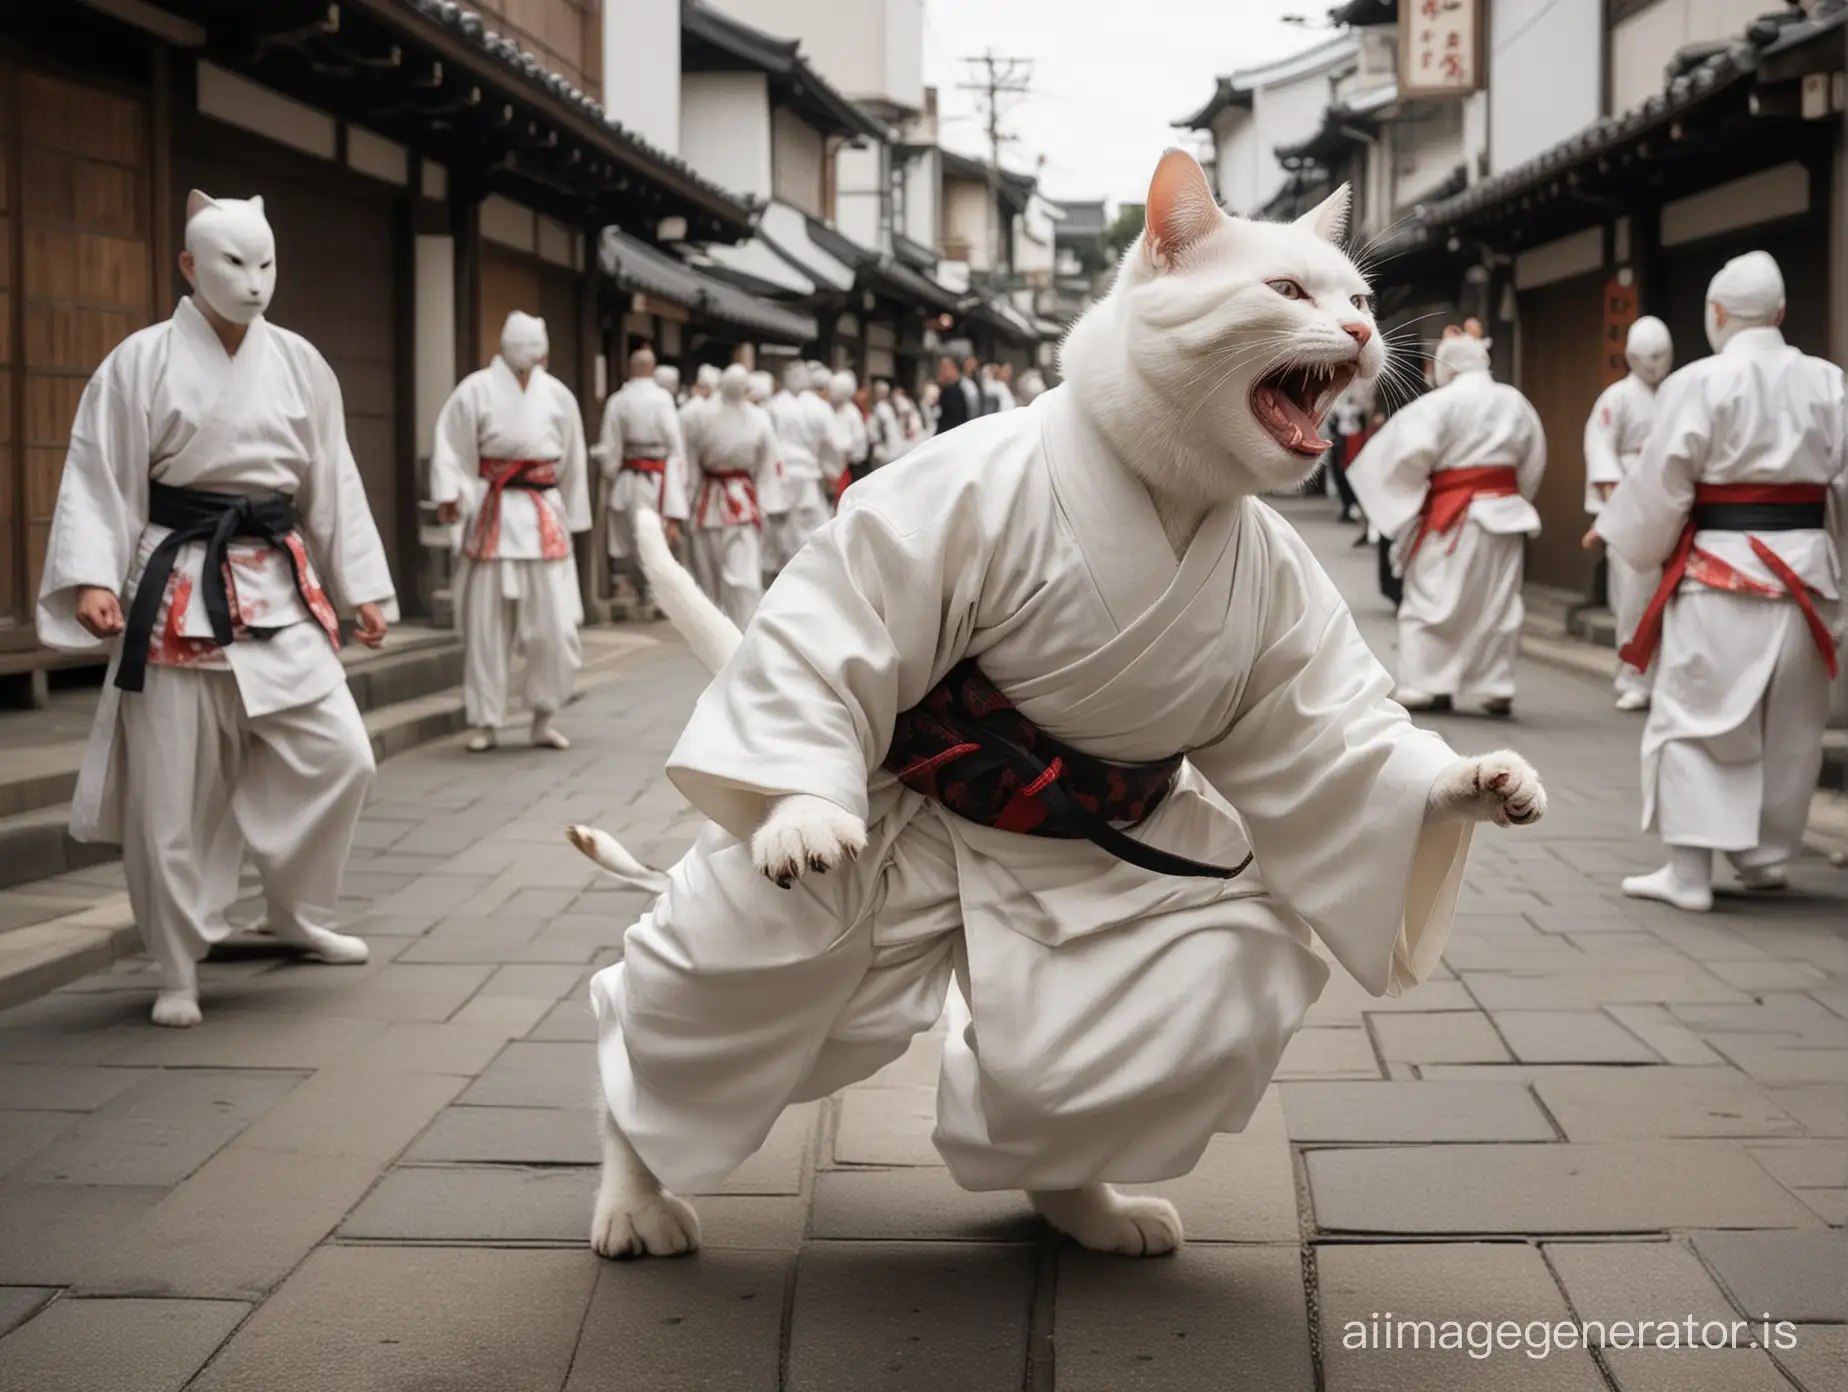 The white cat with black marks moving depicts Eastern martial arts, screaming with its mouth open, wearing 16th-century Japanese clothing on the streets of Tokyo.